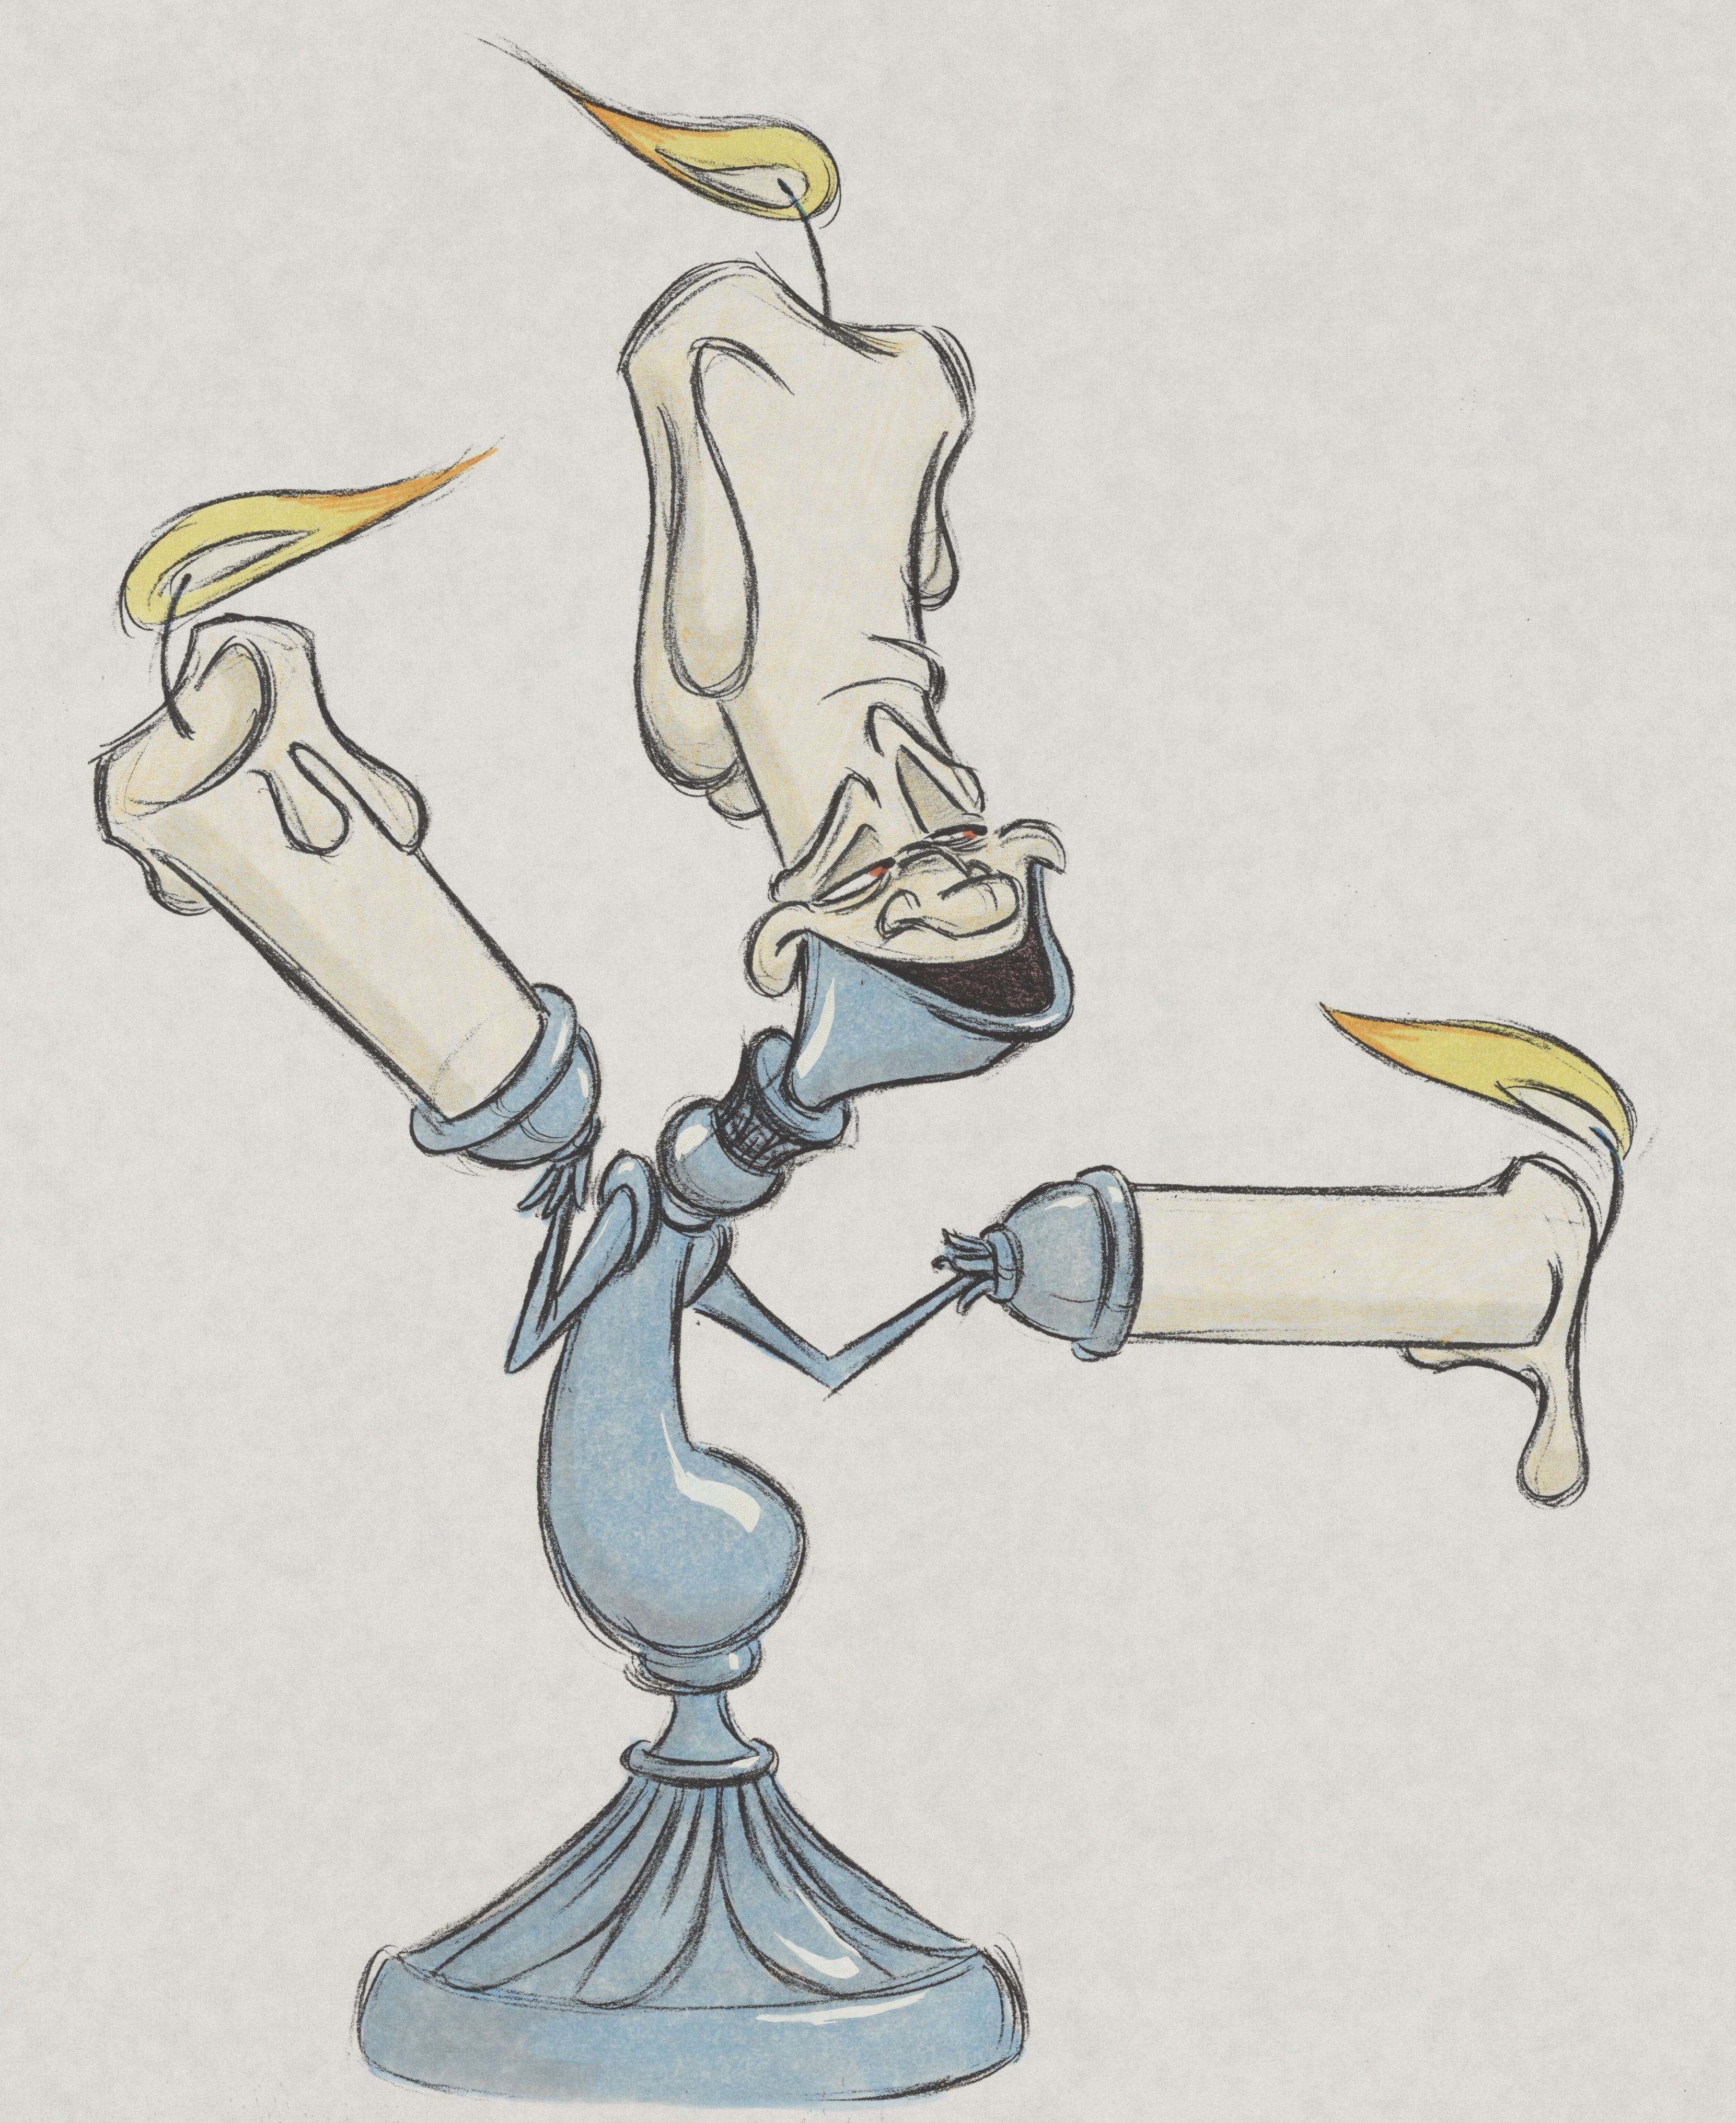 Though the constraints of hand-drawn animation ultimately prevented Lumiere from having a more ornate body, Rococo influences led designers to give him other ornamented designs in order to bring him to life.